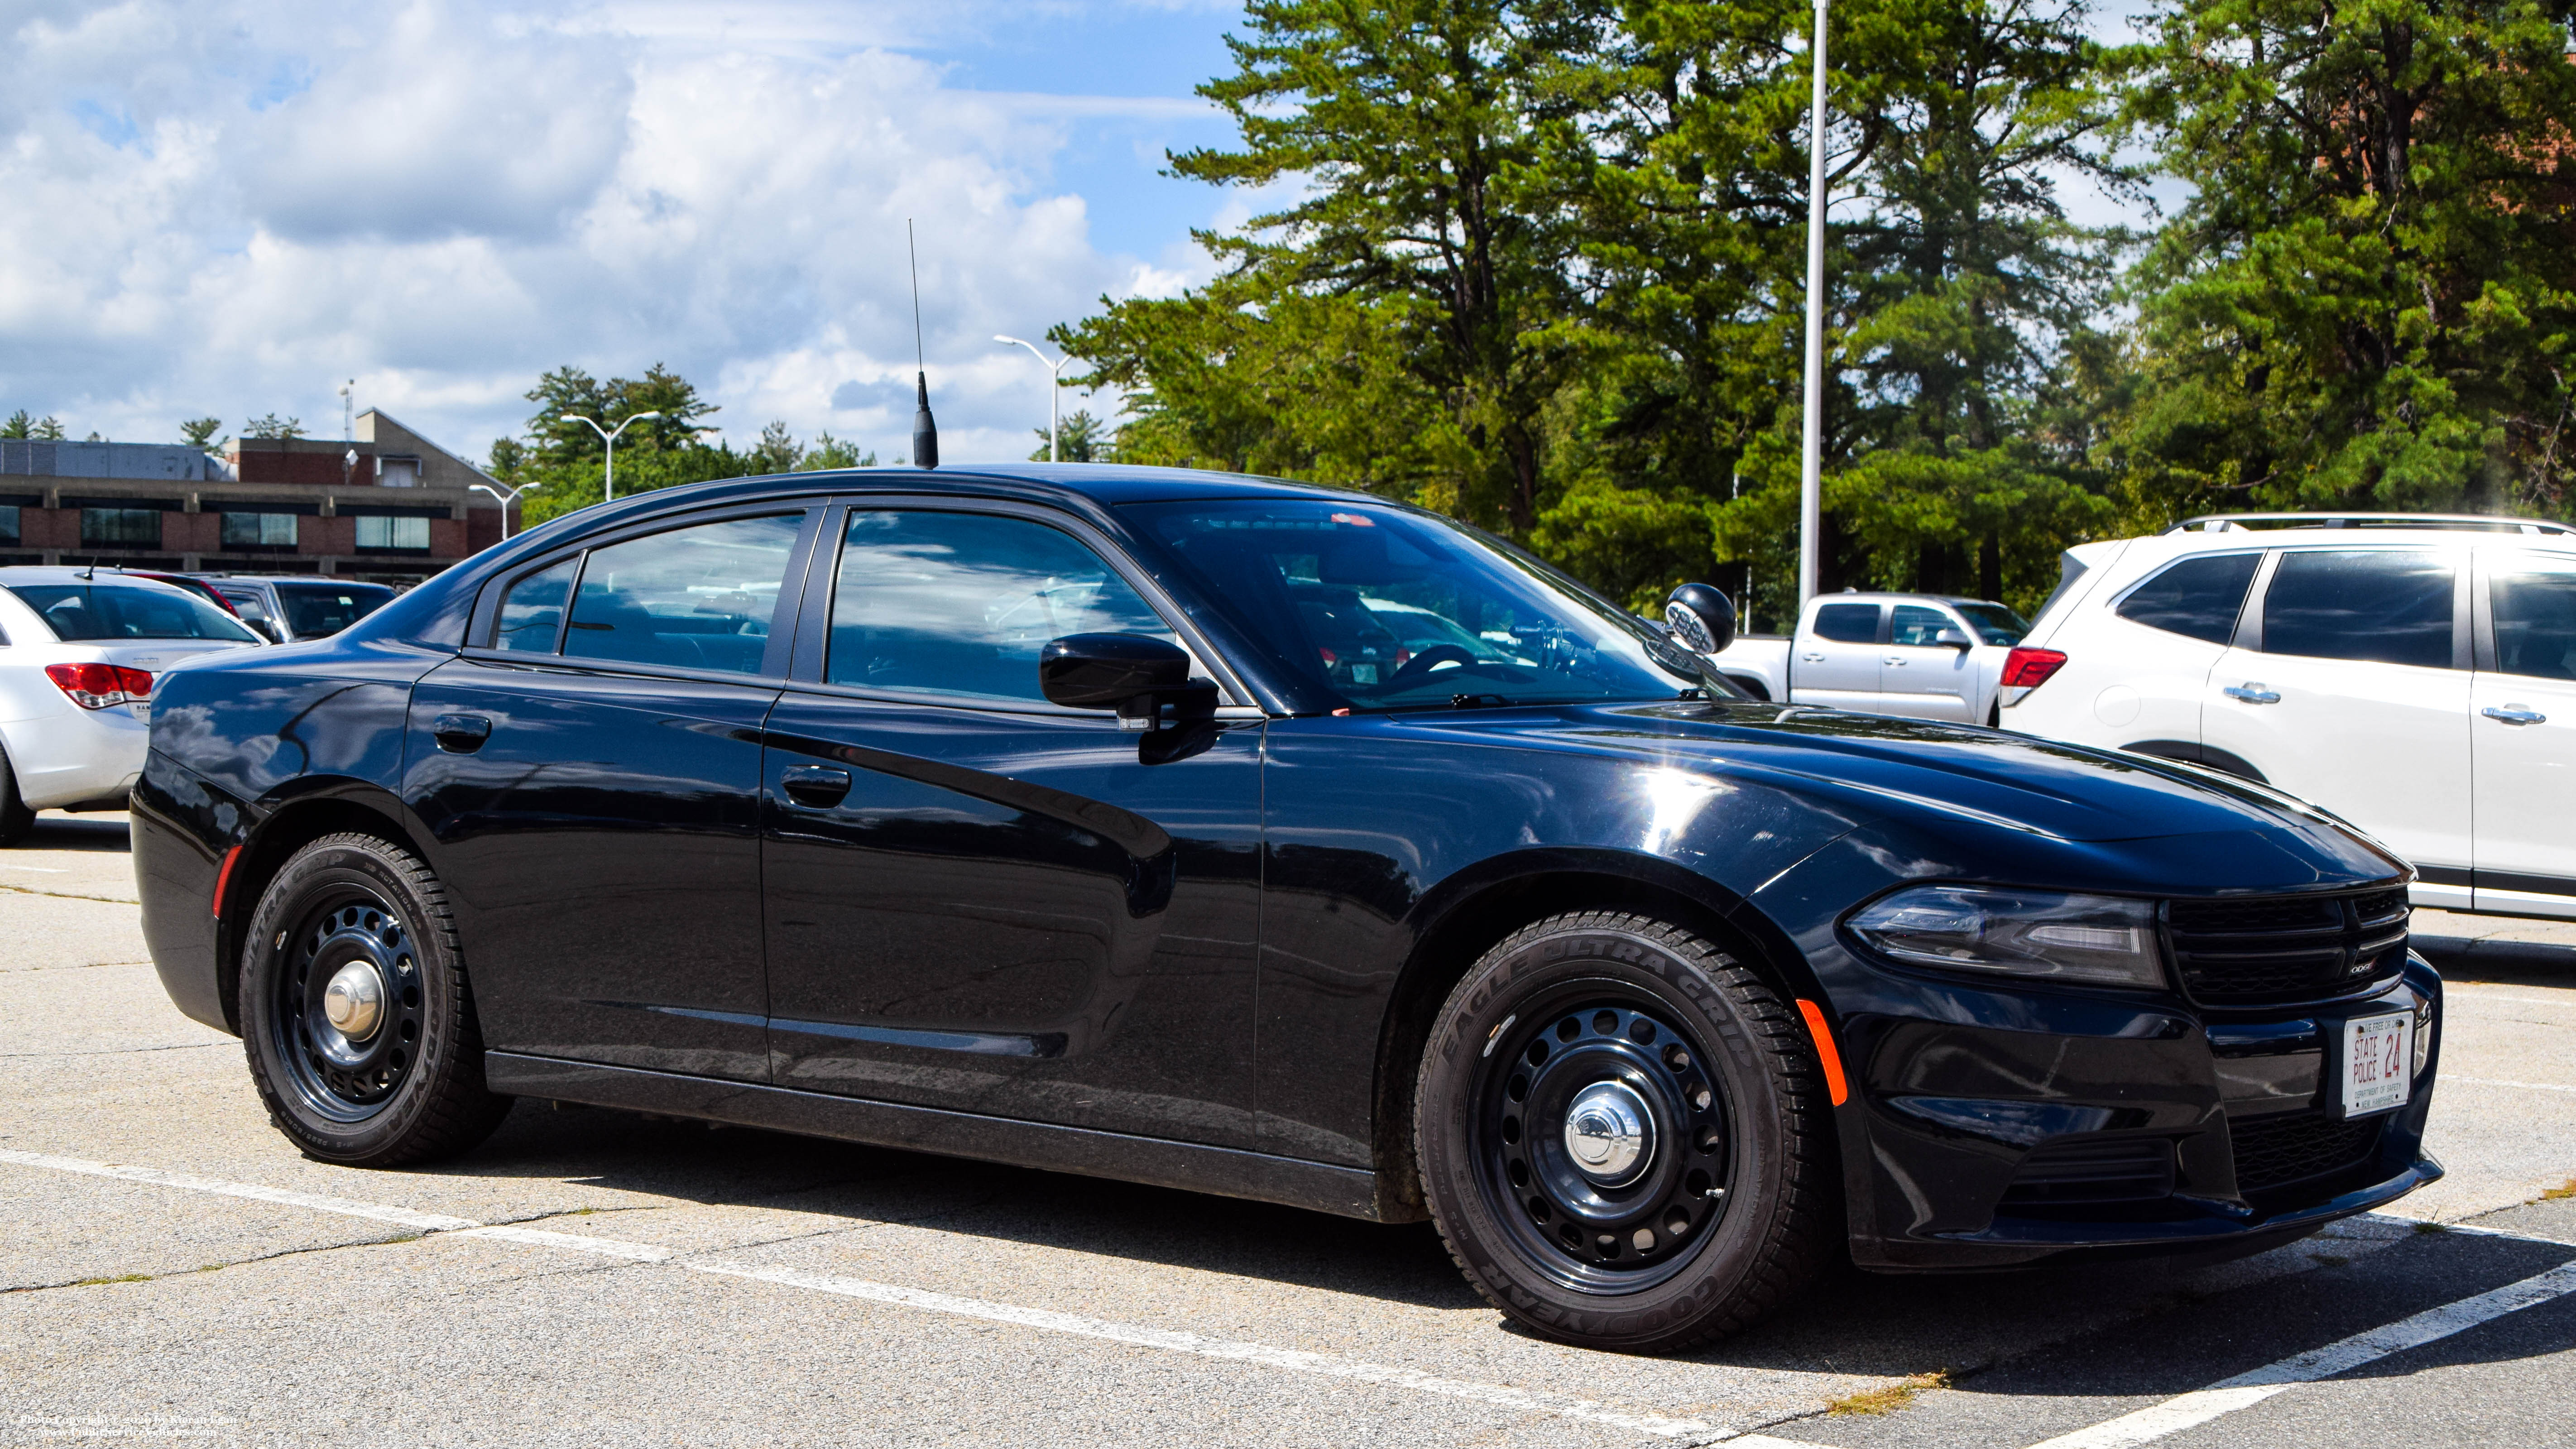 A photo  of New Hampshire State Police
            Cruiser 24, a 2015-2019 Dodge Charger             taken by Kieran Egan